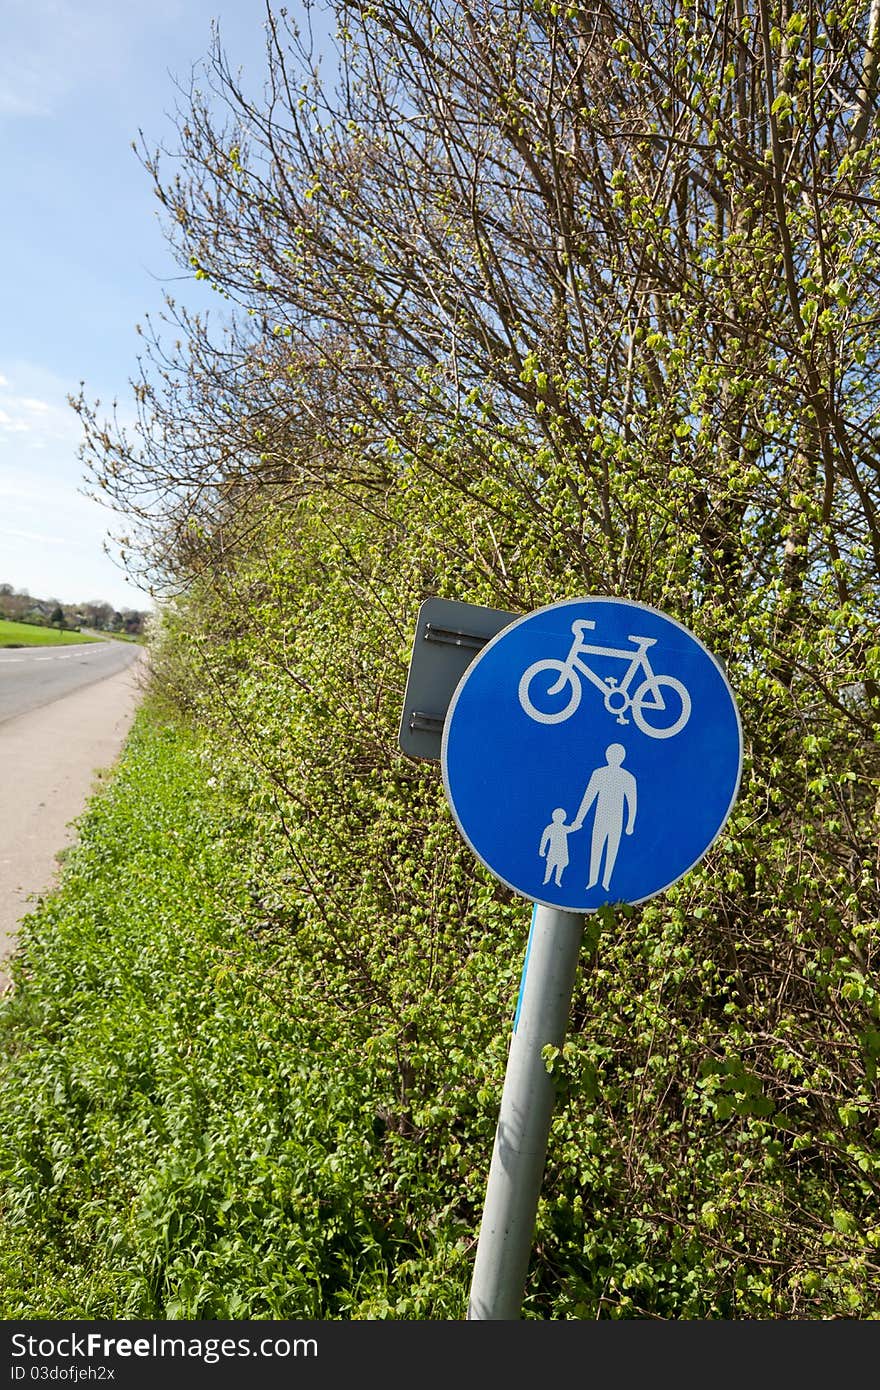 Hedgerow sign indicating a combined cycle and pedestrian footpath beside a country lane. Hedgerow sign indicating a combined cycle and pedestrian footpath beside a country lane.